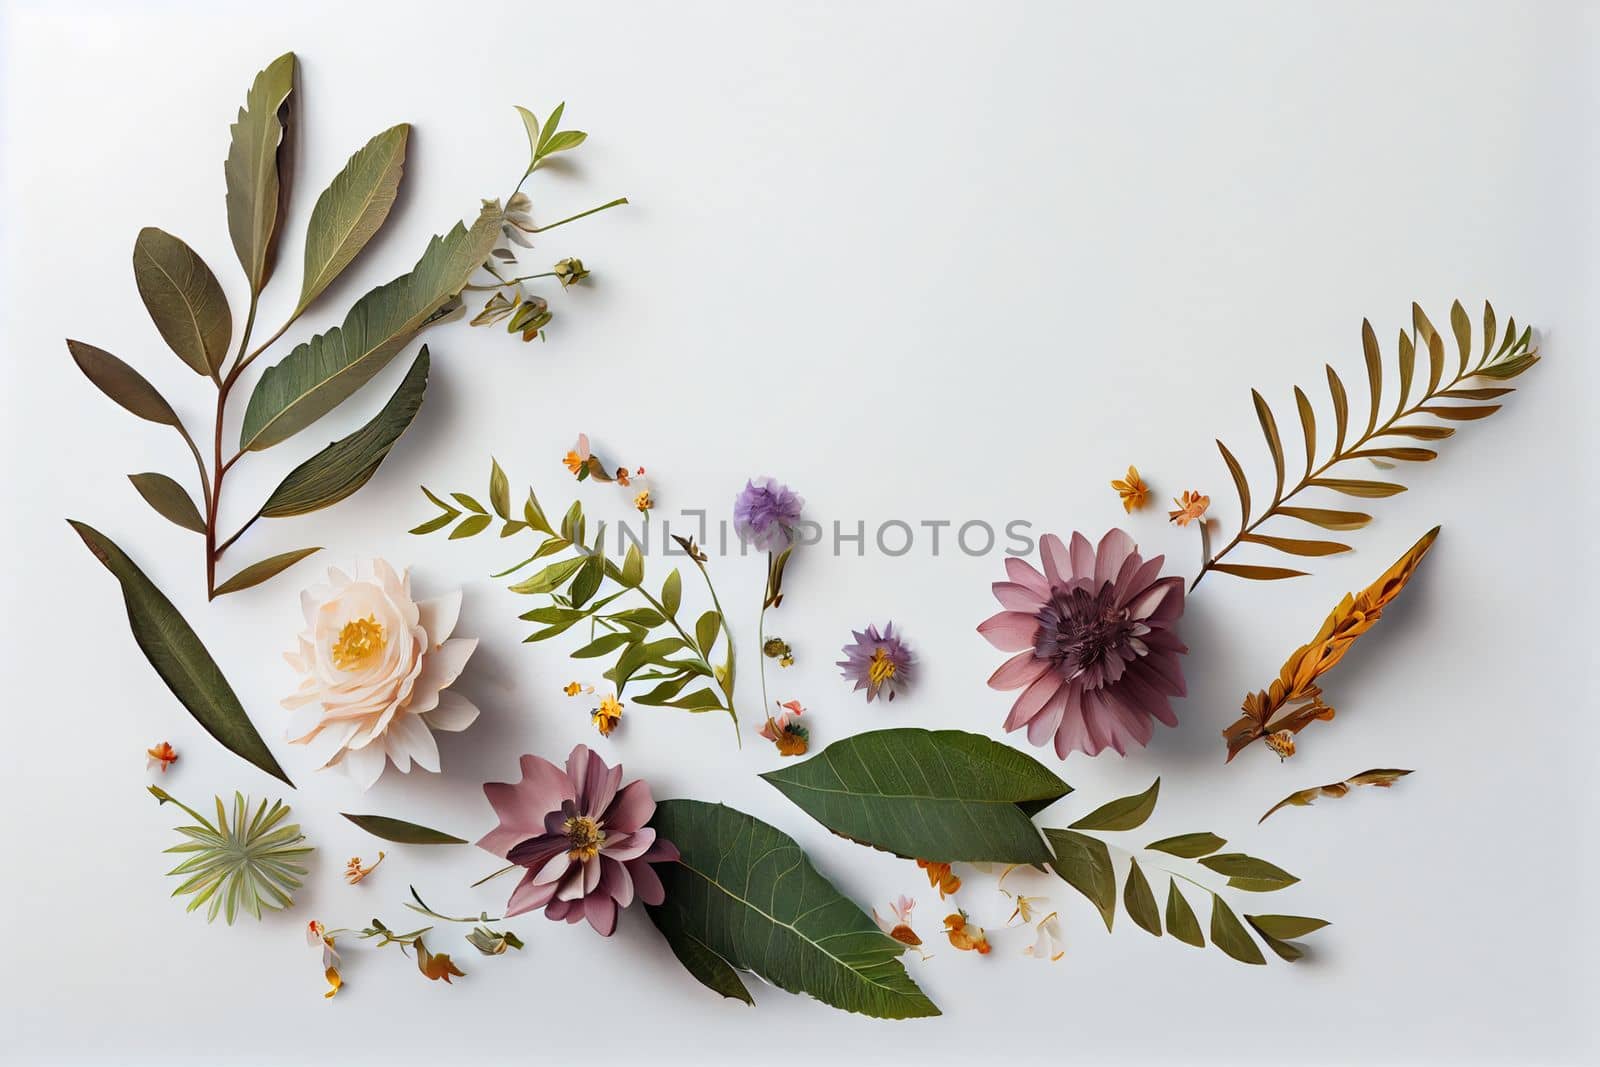 Composition of flowers. Frame pattern made from different dried flowers and leaves on white background. Flat lay, top view, copy space by FokasuArt